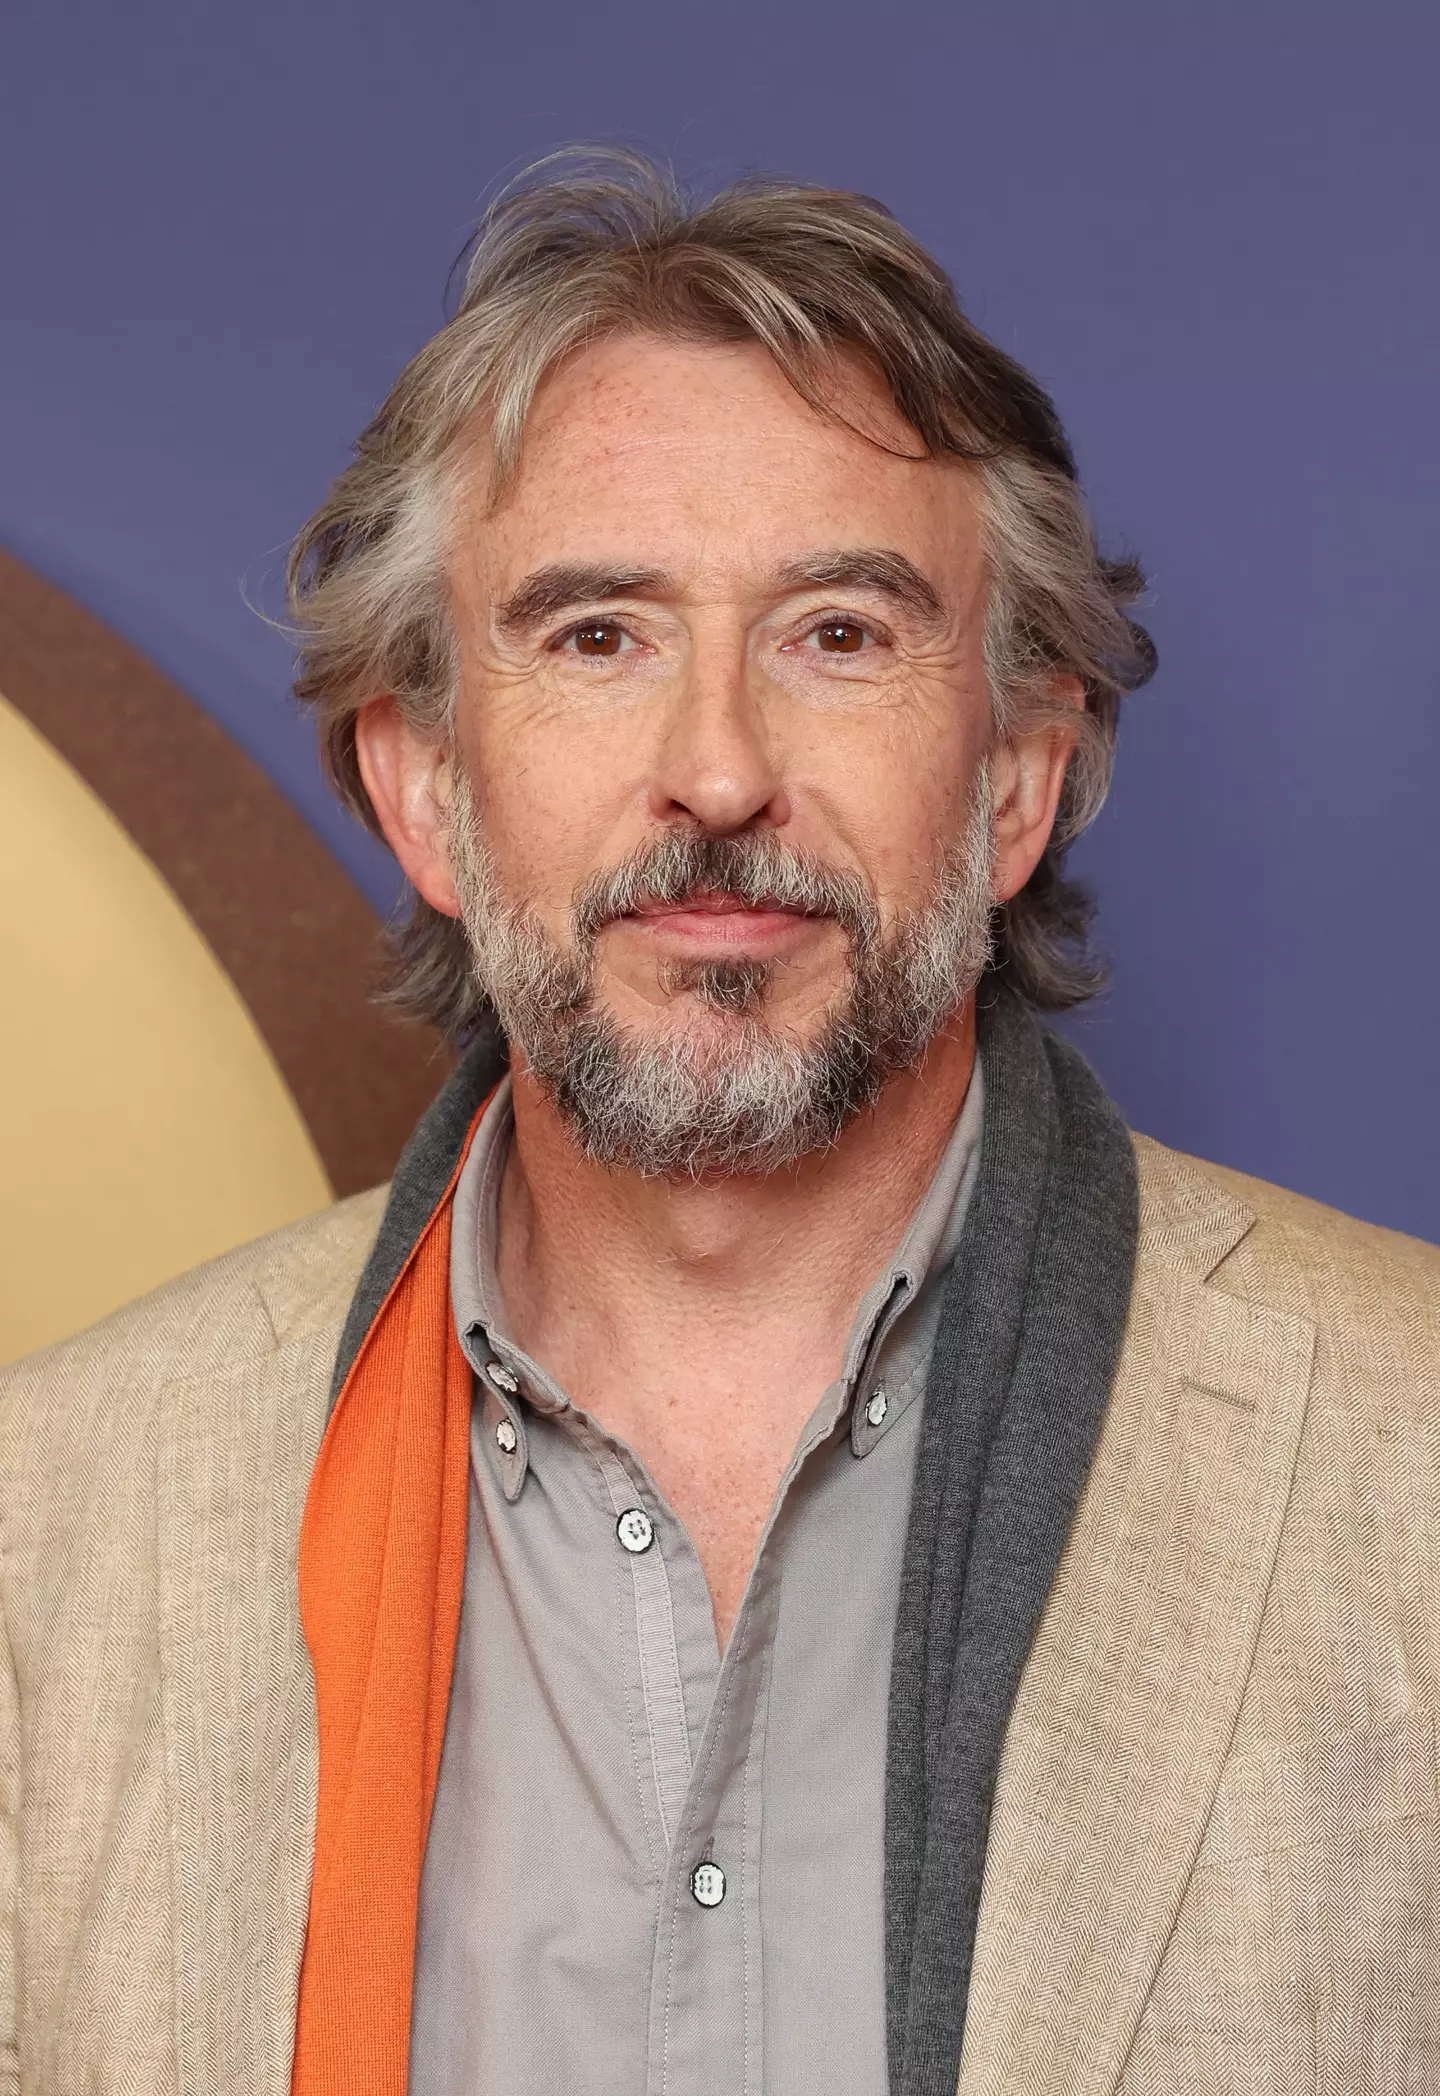 Steve Coogan has defended his decision to portray the notorious sex offender.